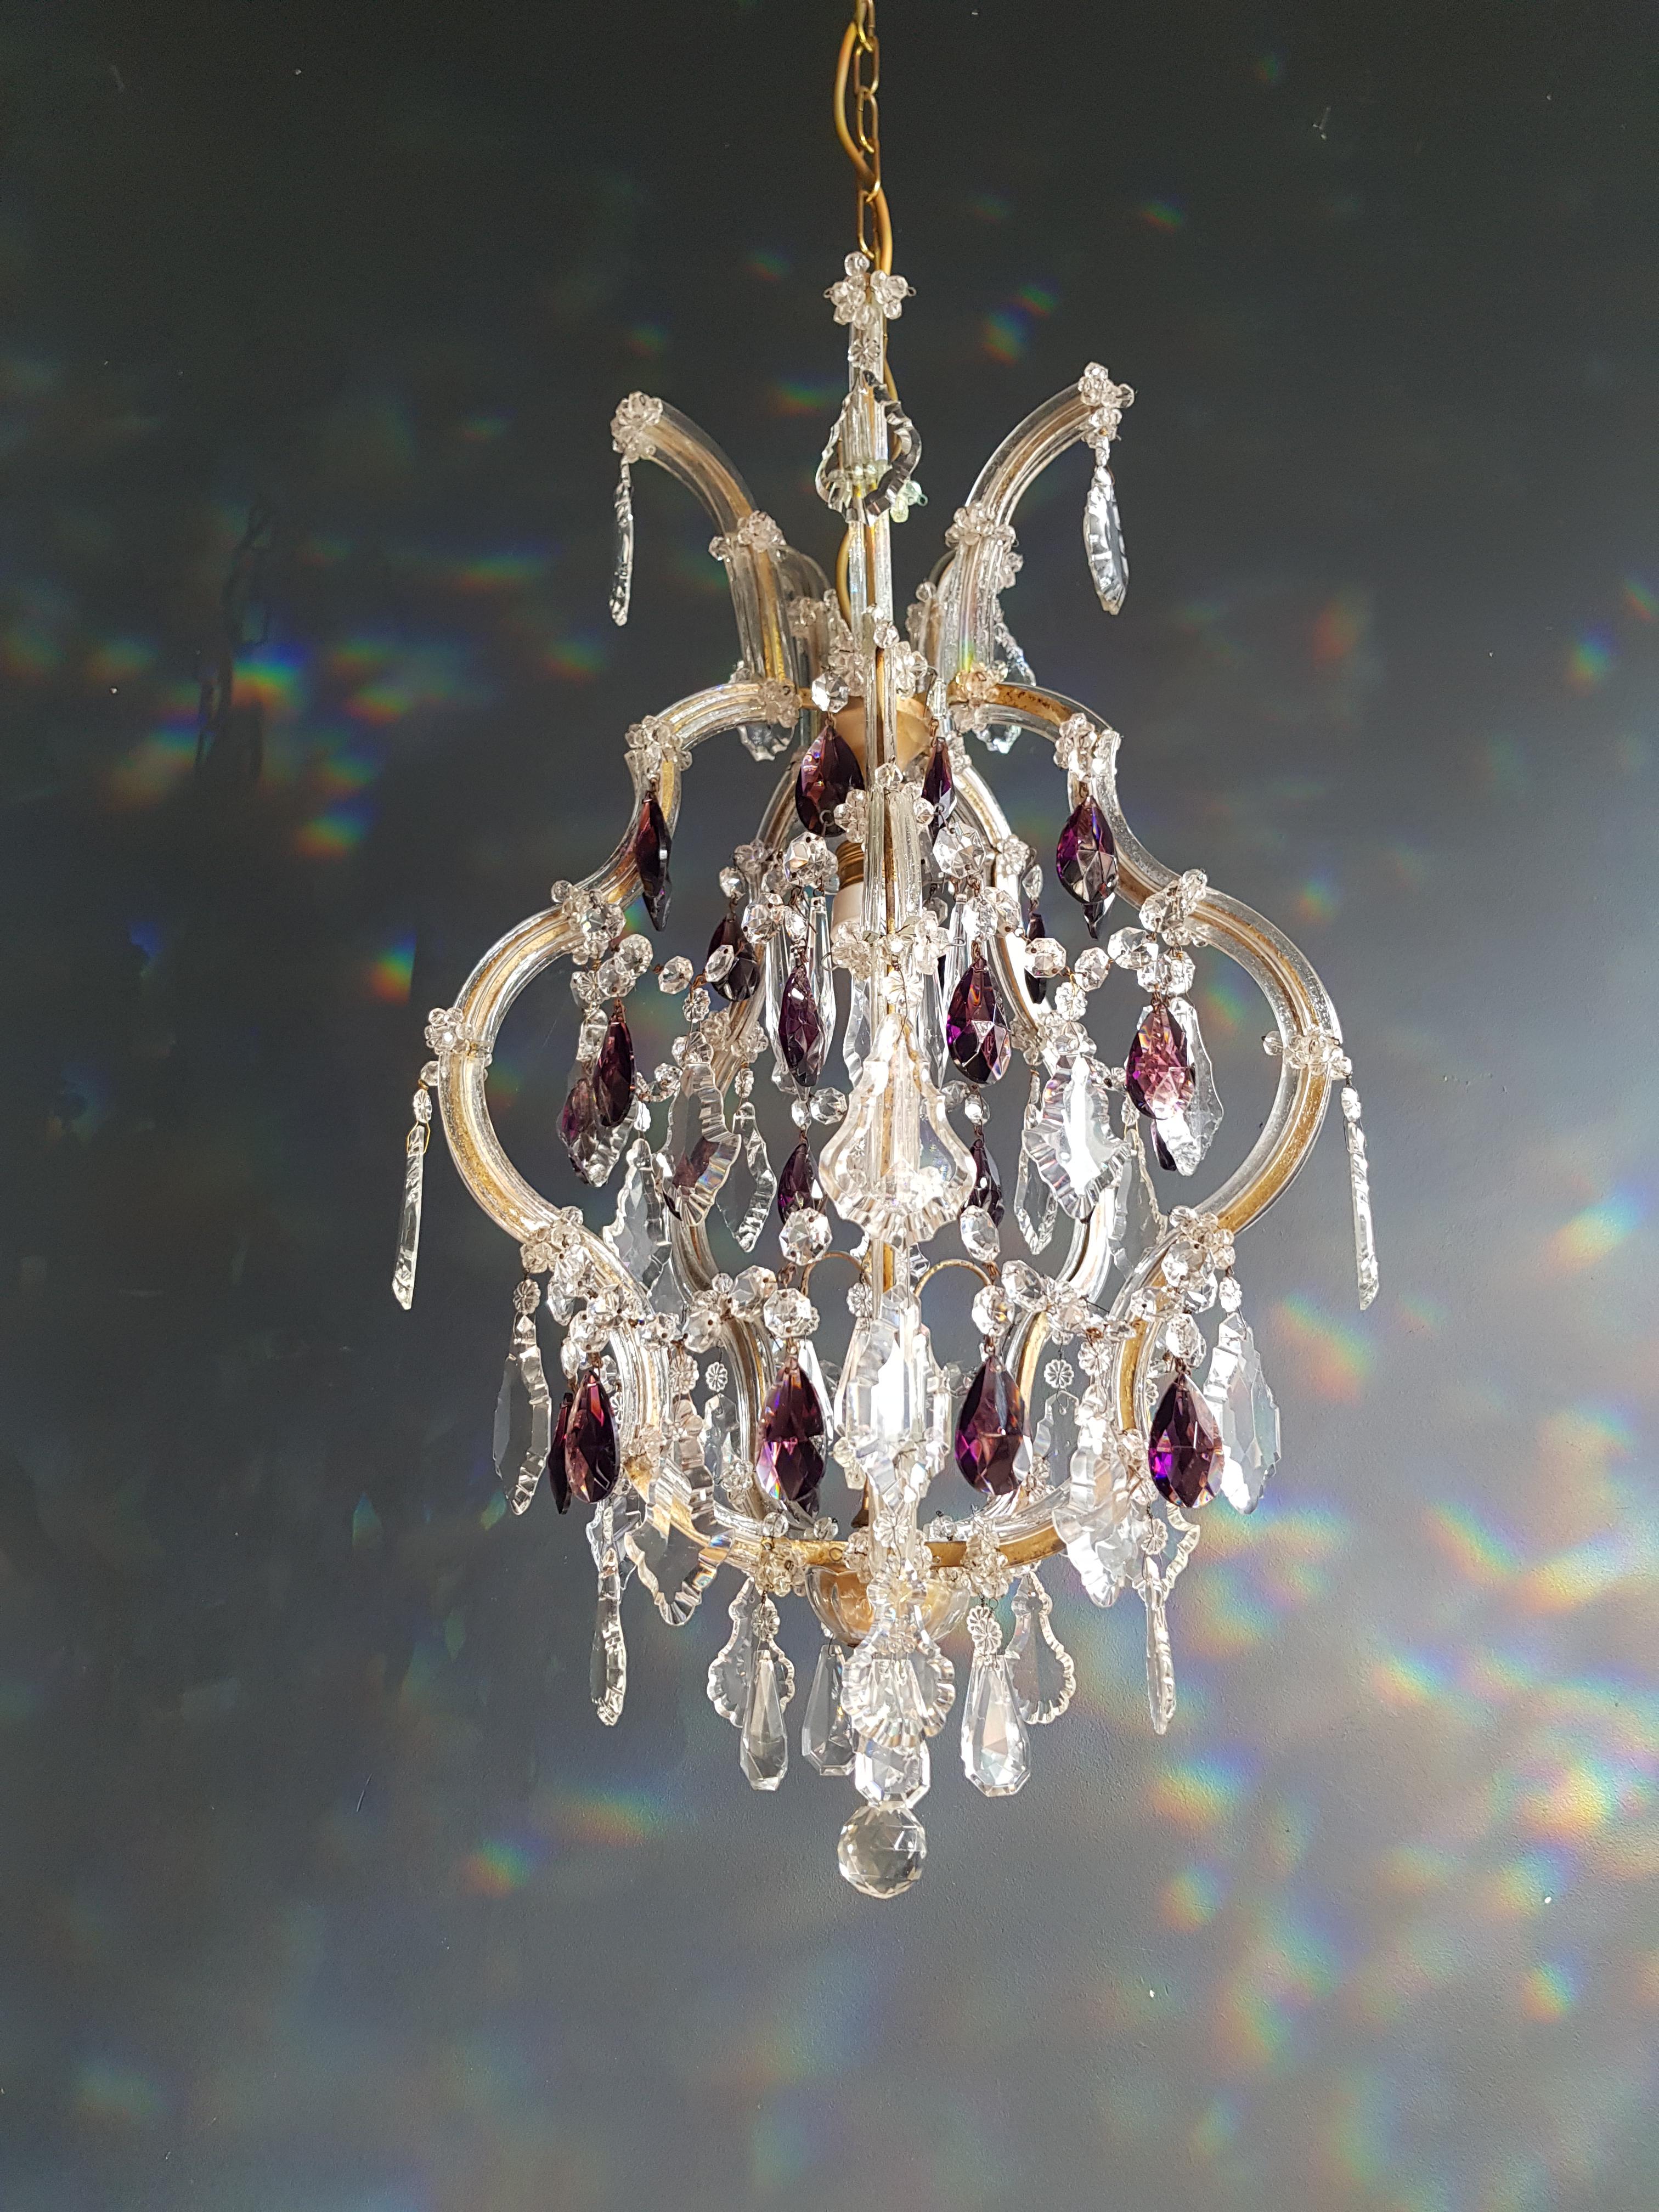 Maria Theresa Crystal Purple Chandelier - Antique Ceiling Lamp with Art Nouveau Elegance

Introducing a captivating Maria Theresa crystal purple chandelier, a true embodiment of Art Nouveau charm. The frame is intricately adorned with glass,